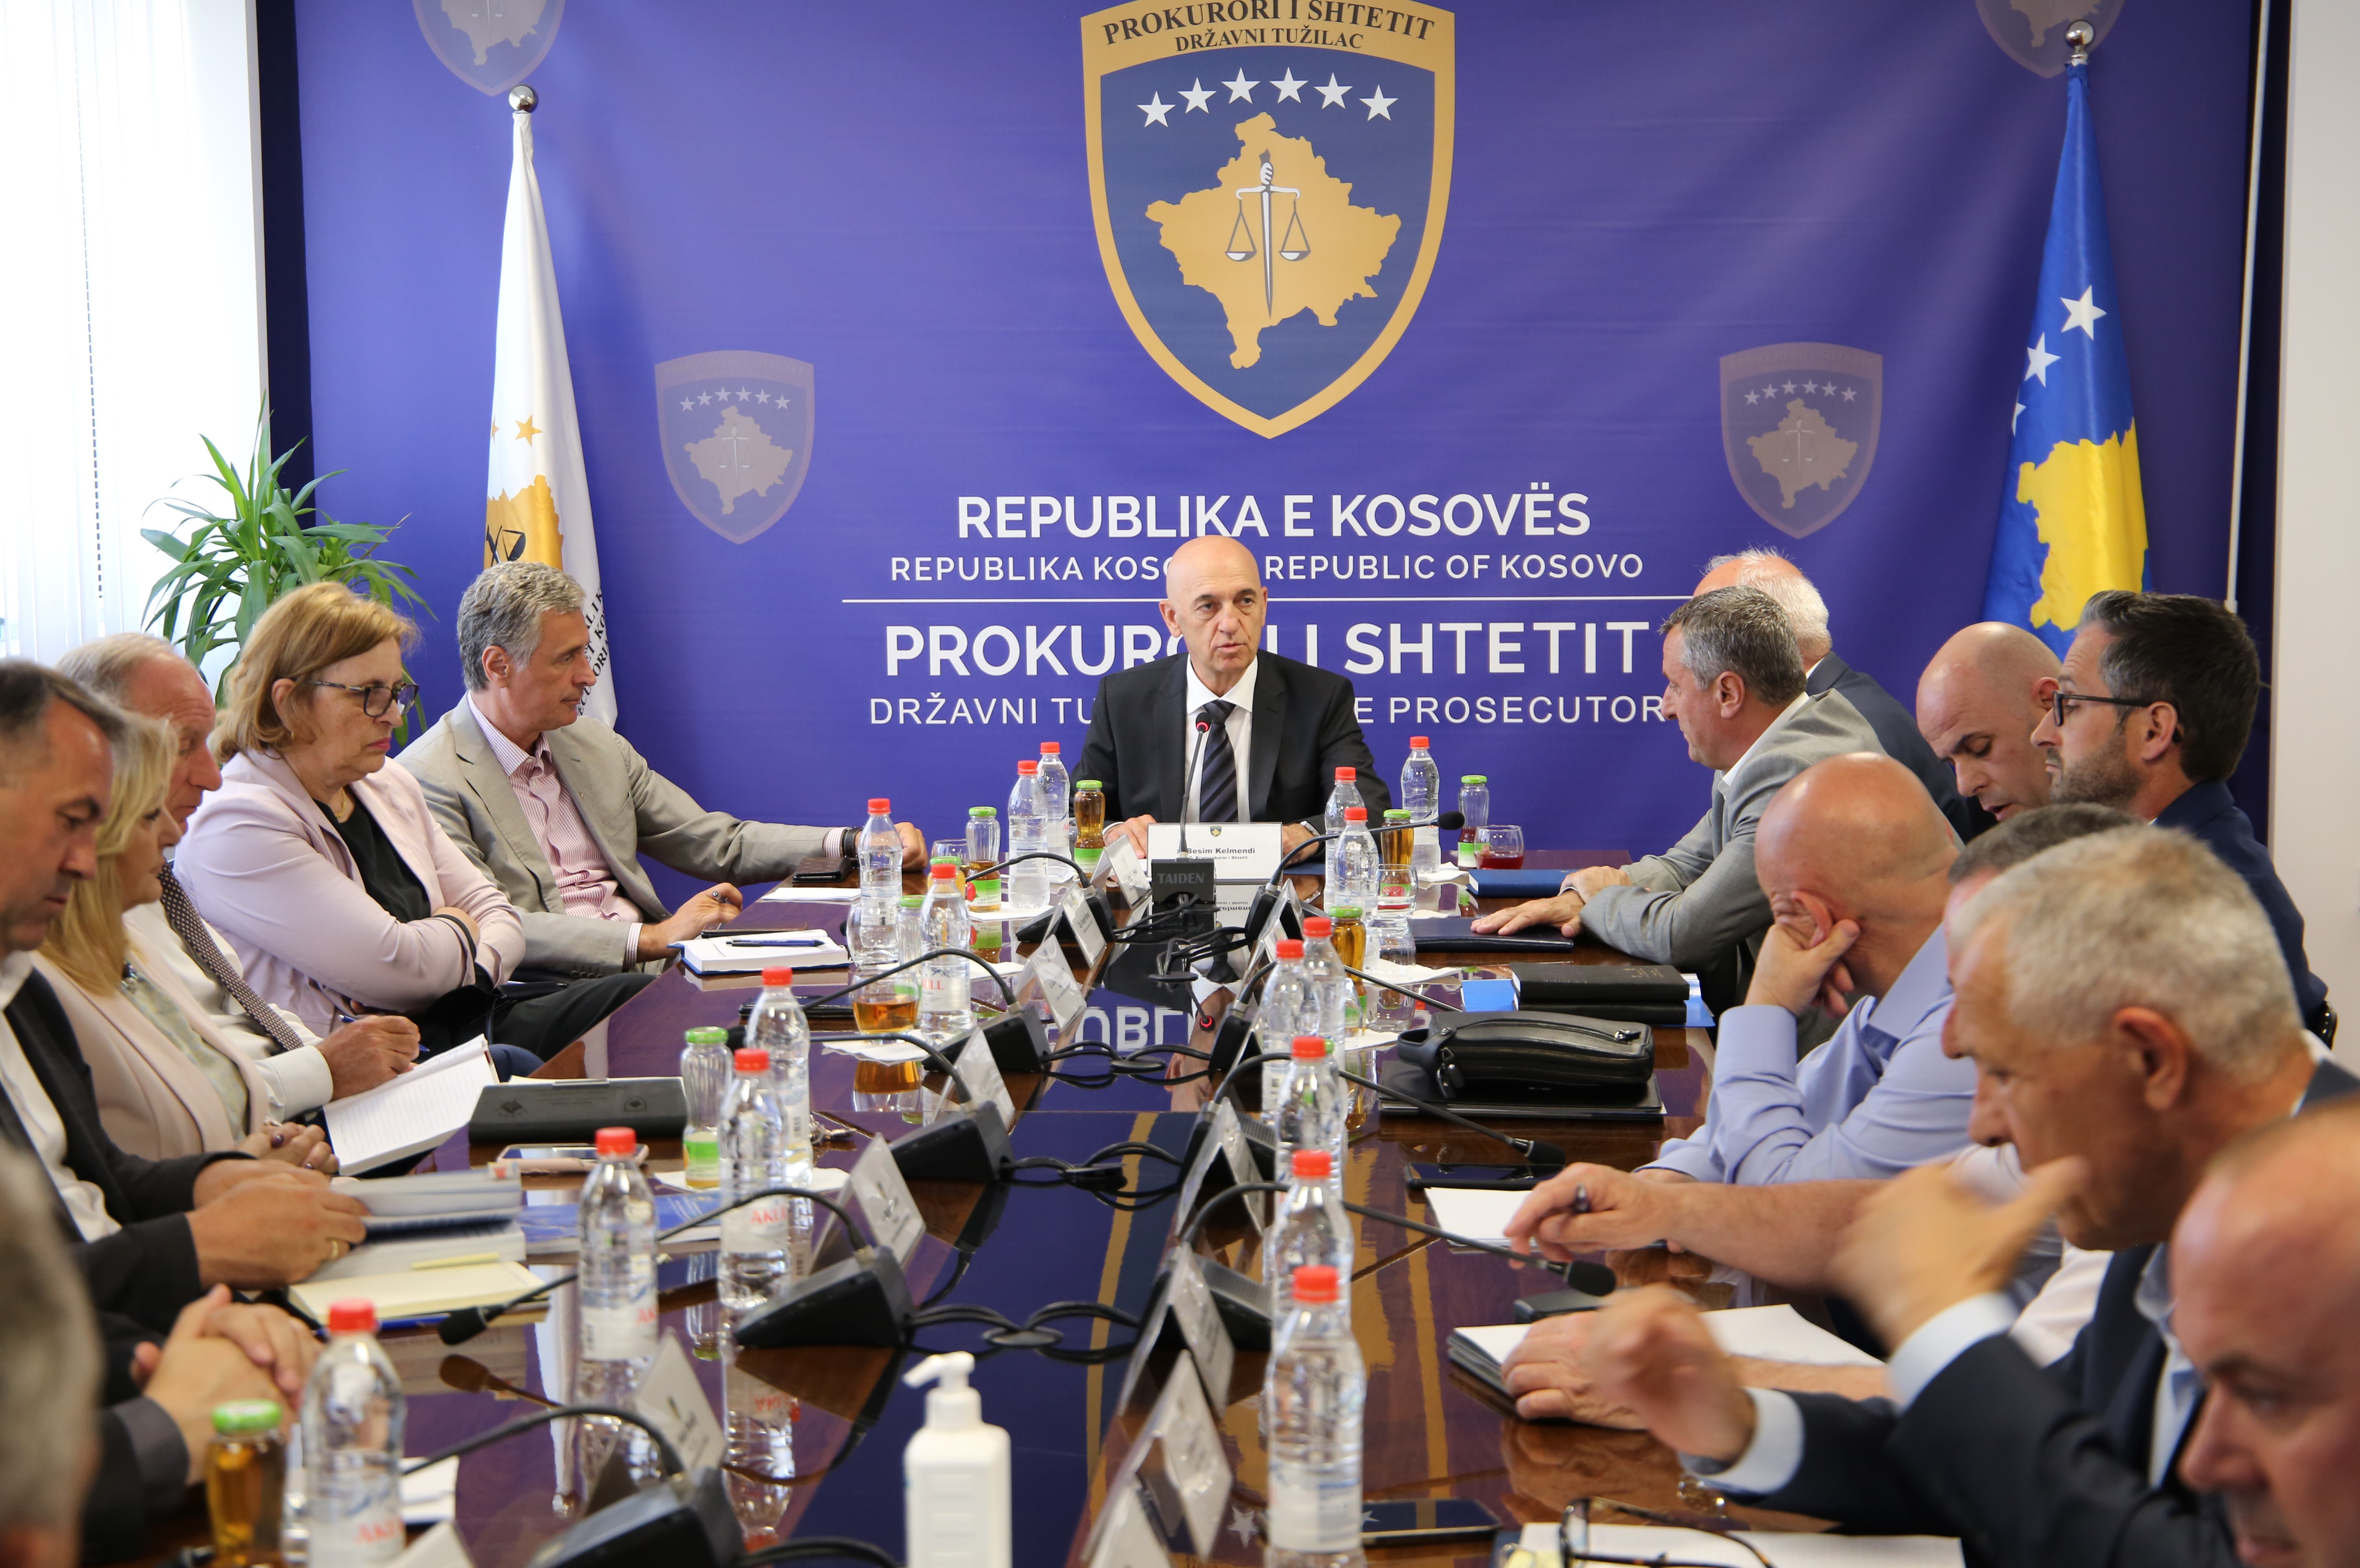 The Acting Chief State Prosecutor held a meeting with the Collegium of Prosecutors of the Office of the Chief State Prosecutor and Chief Prosecutors of Prosecution Offices of the Republic of Kosovo